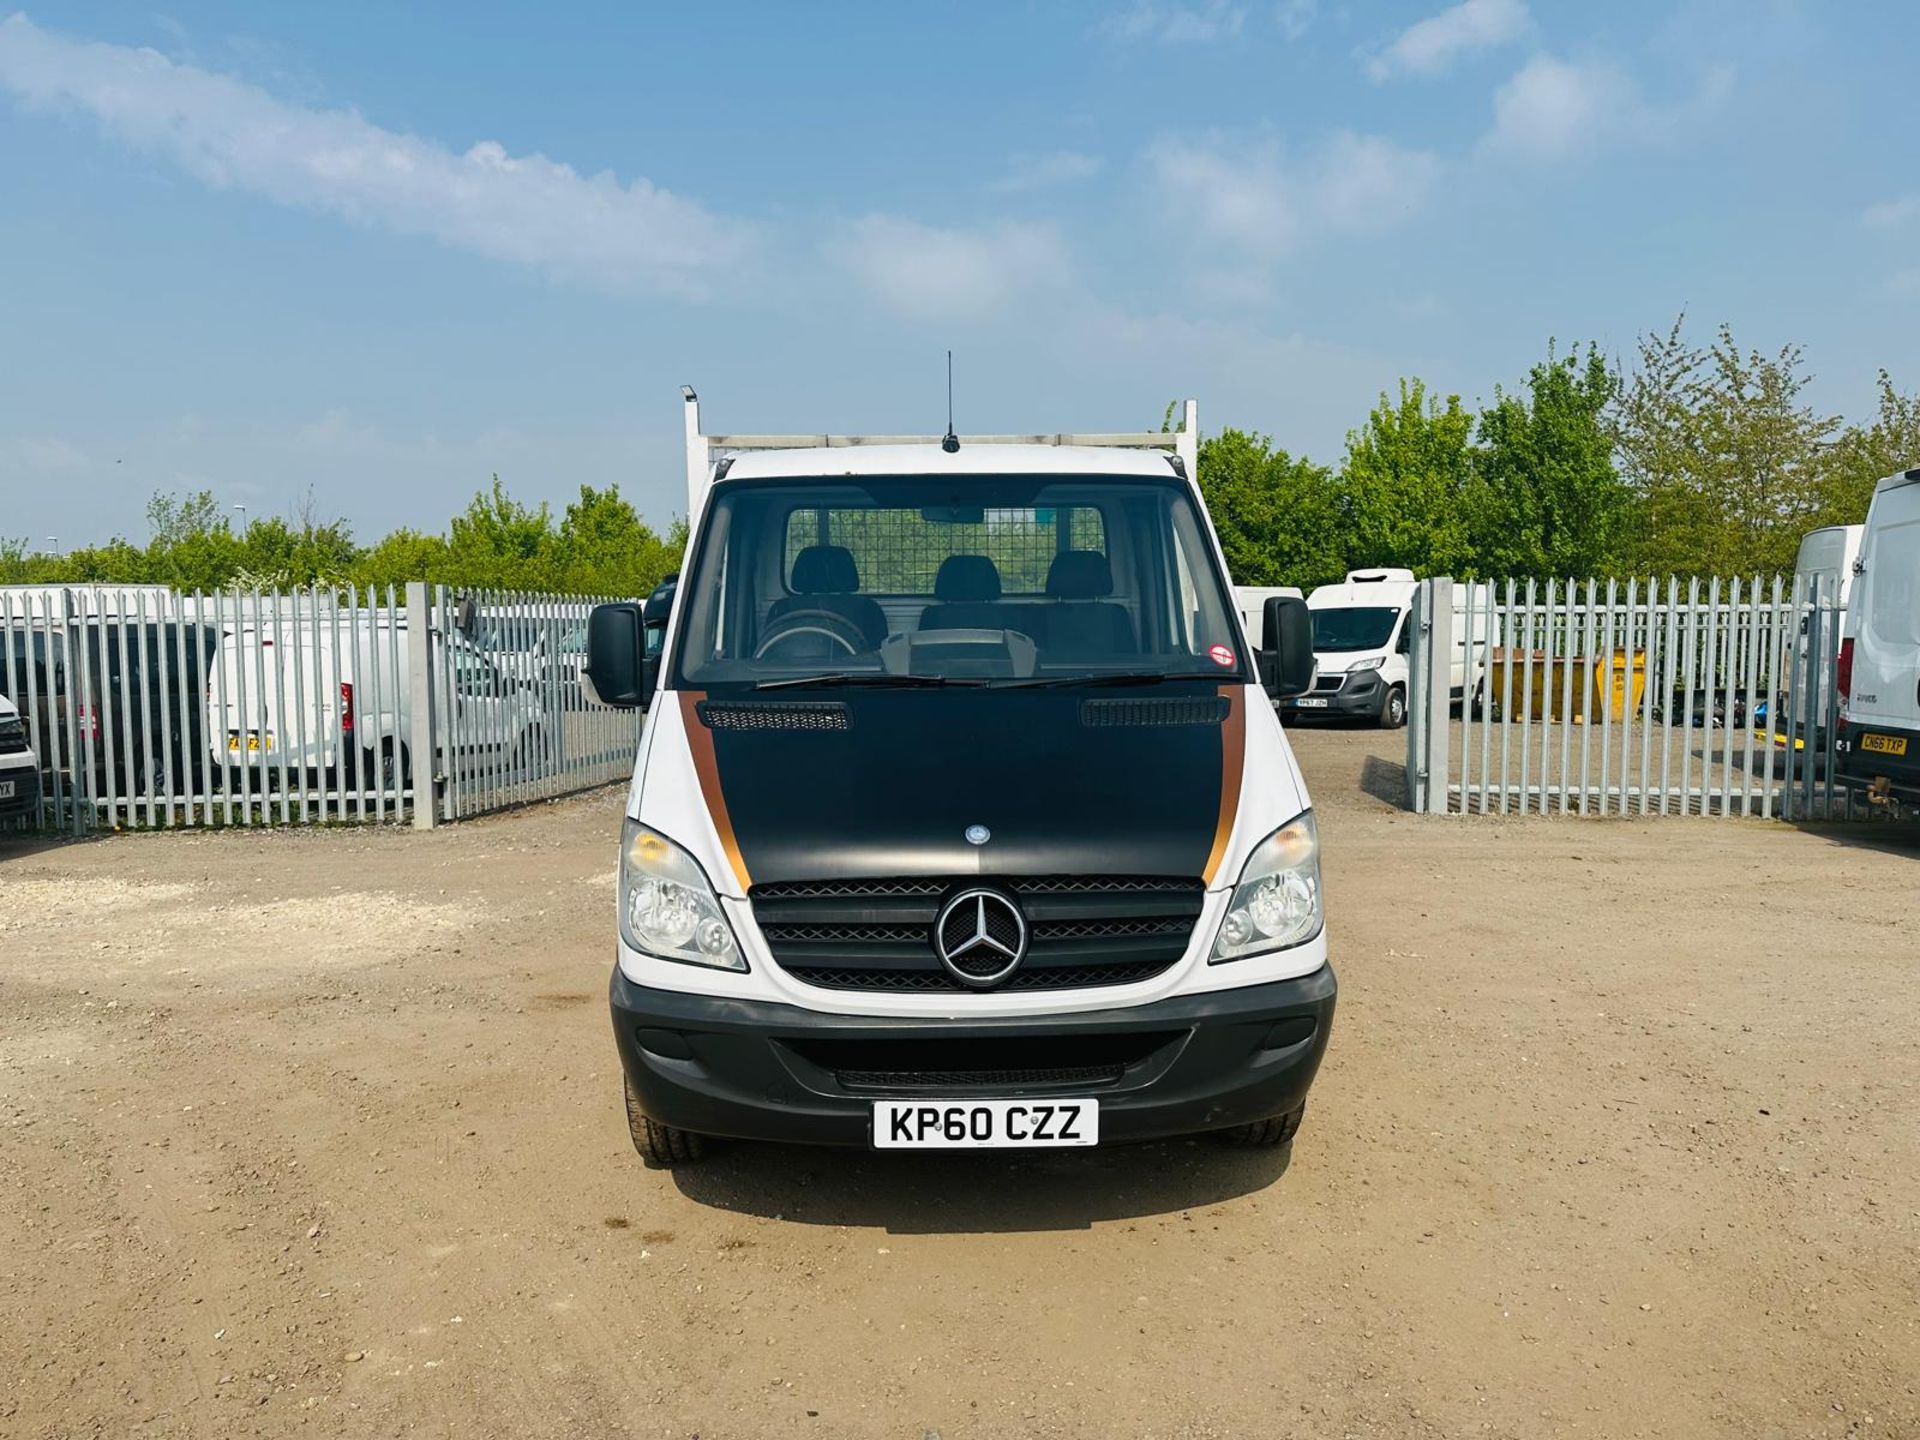 ** ON SALE ** Mercedes-Benz Sprinter 313 CDI 2.1 3.5T Alloy Double Dropside Body 2010 '60 Reg' - Image 2 of 23